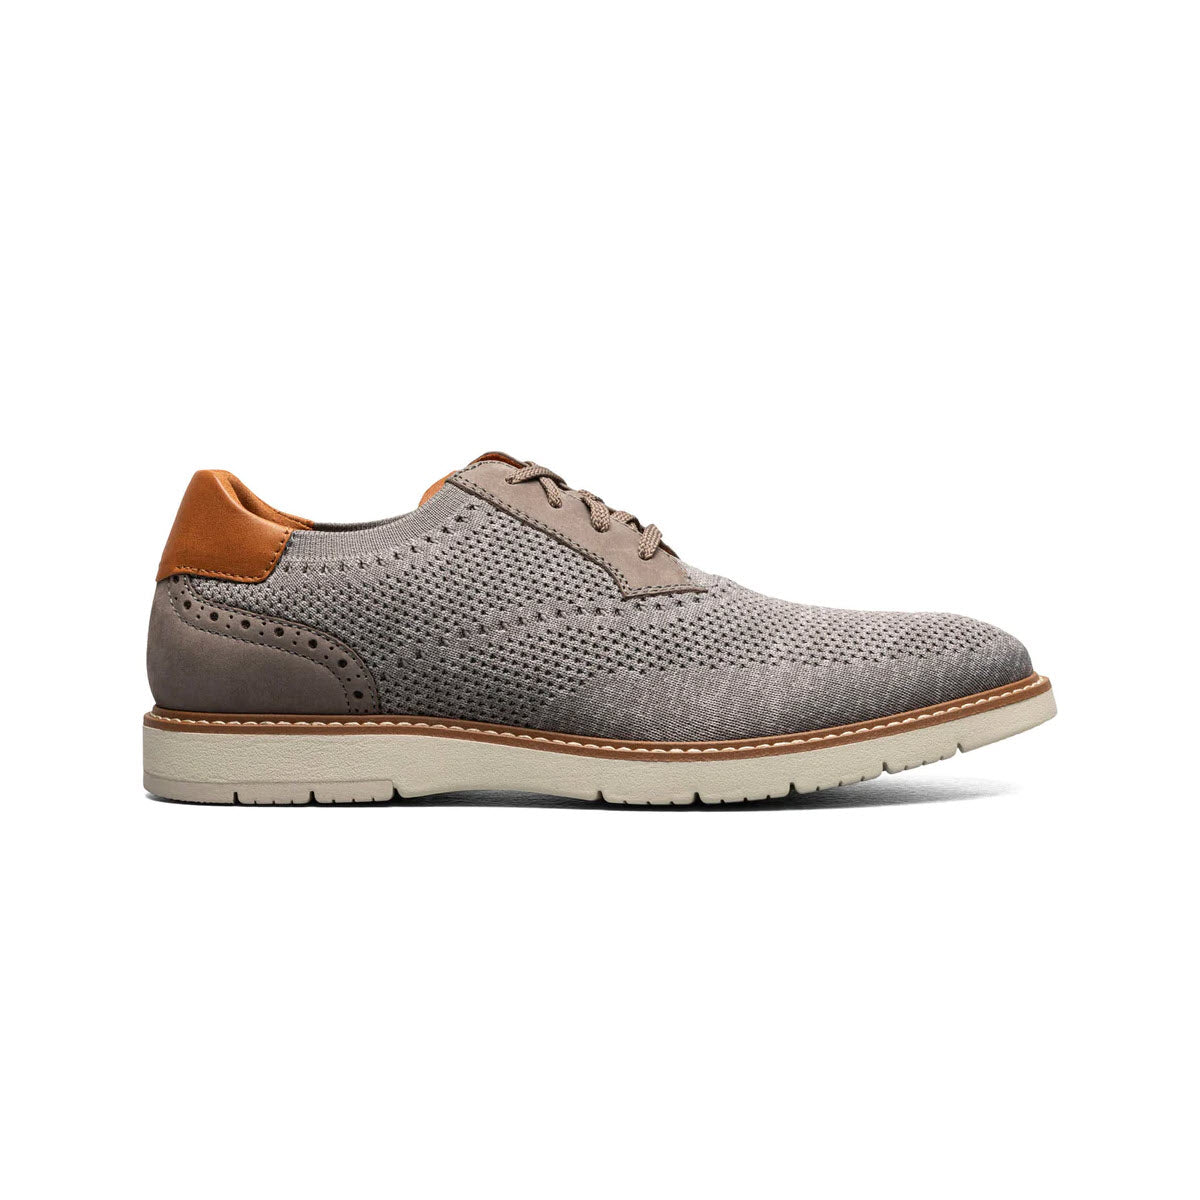 A single Florsheim Vibe Knit Plain Toe Oxford Gray shoe with perforated detailing and a brown leather heel tab, displayed against a white background.